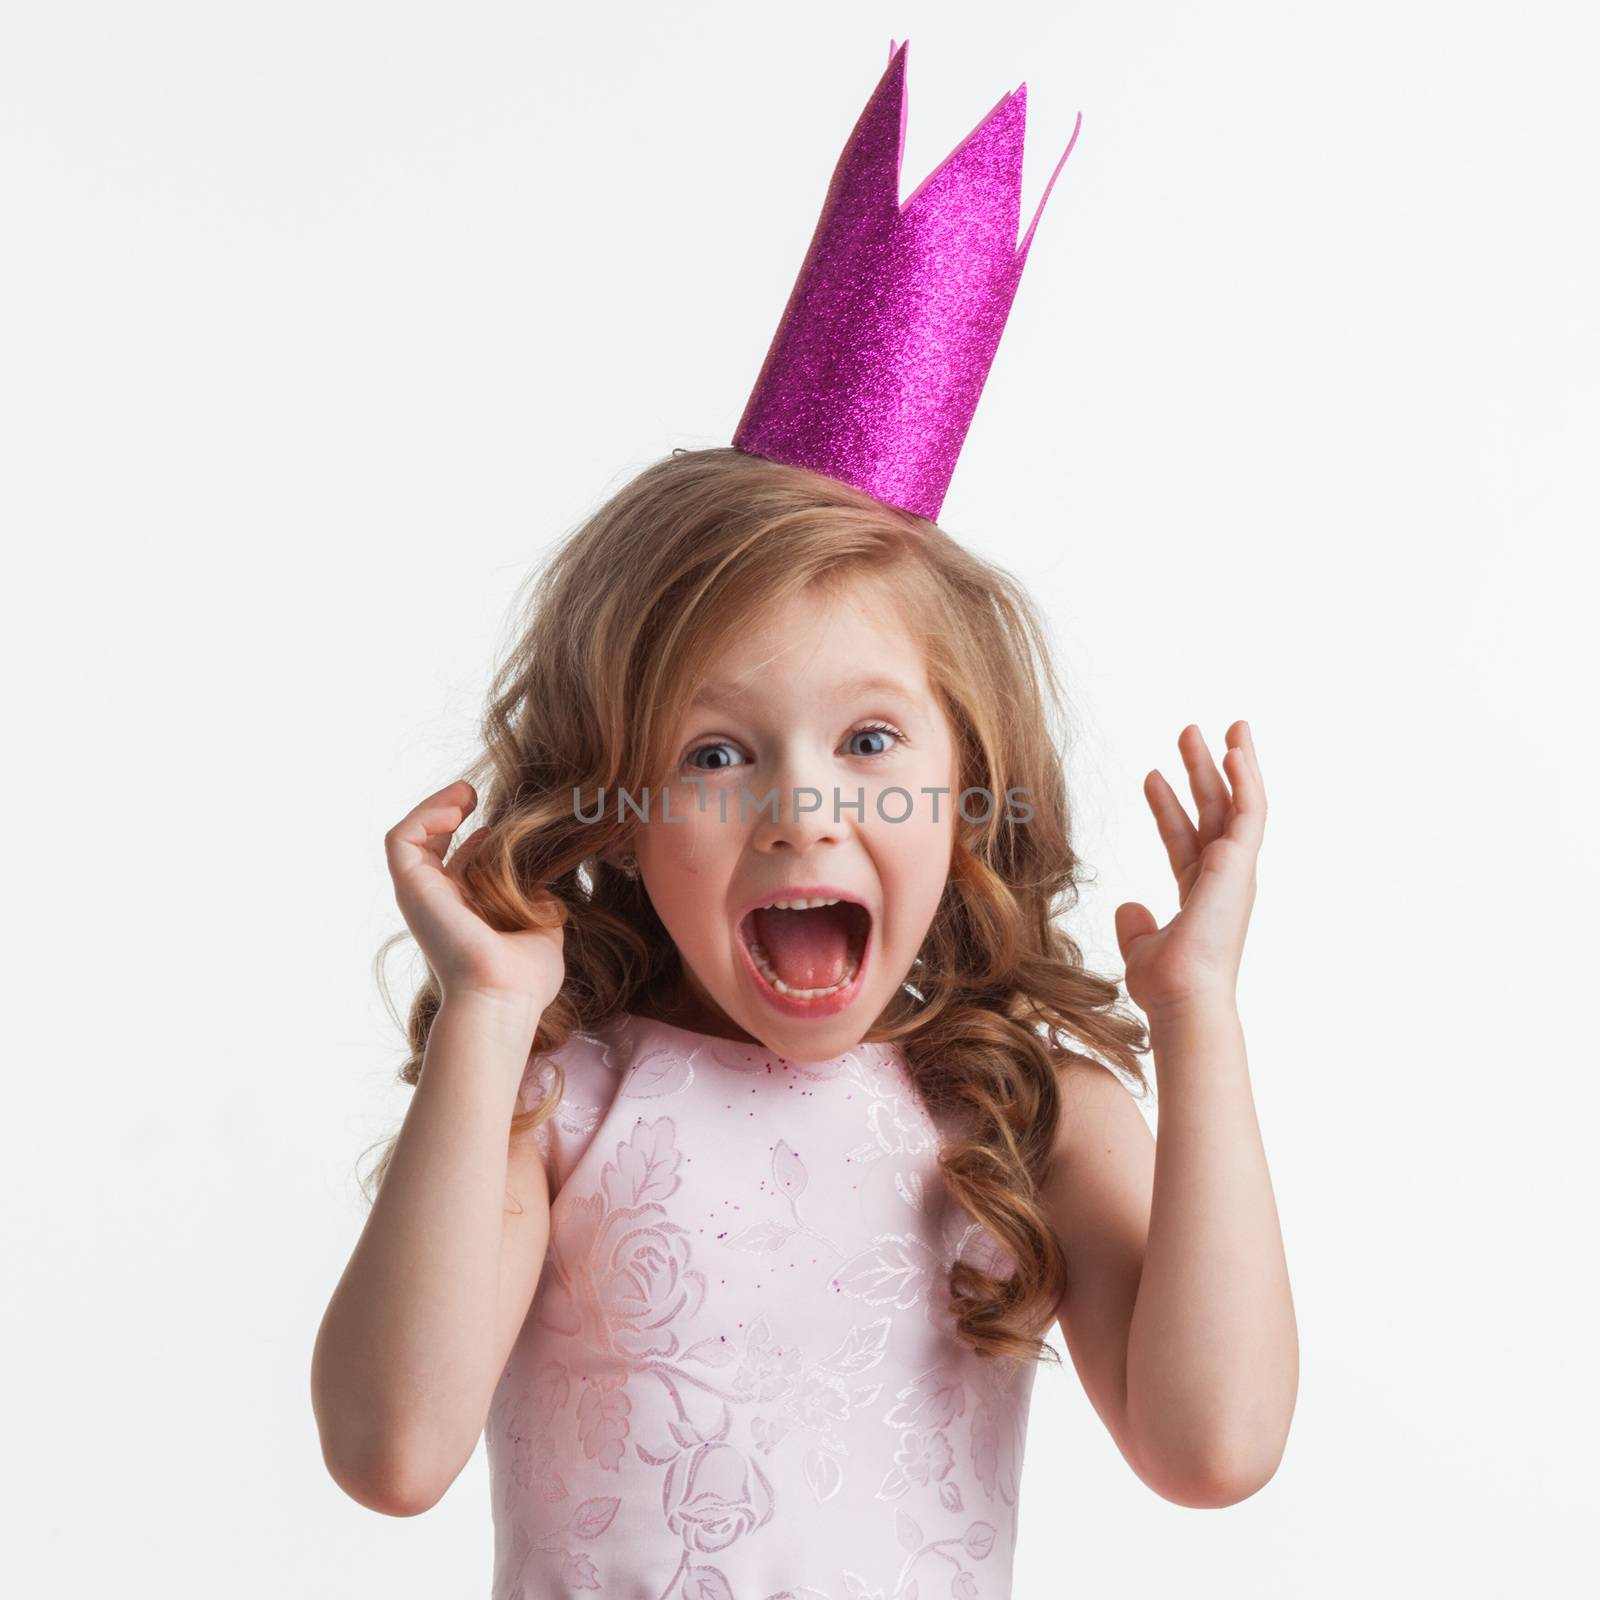 Little cute surprised girl in pink halloween princess costume and crown isolated on white background